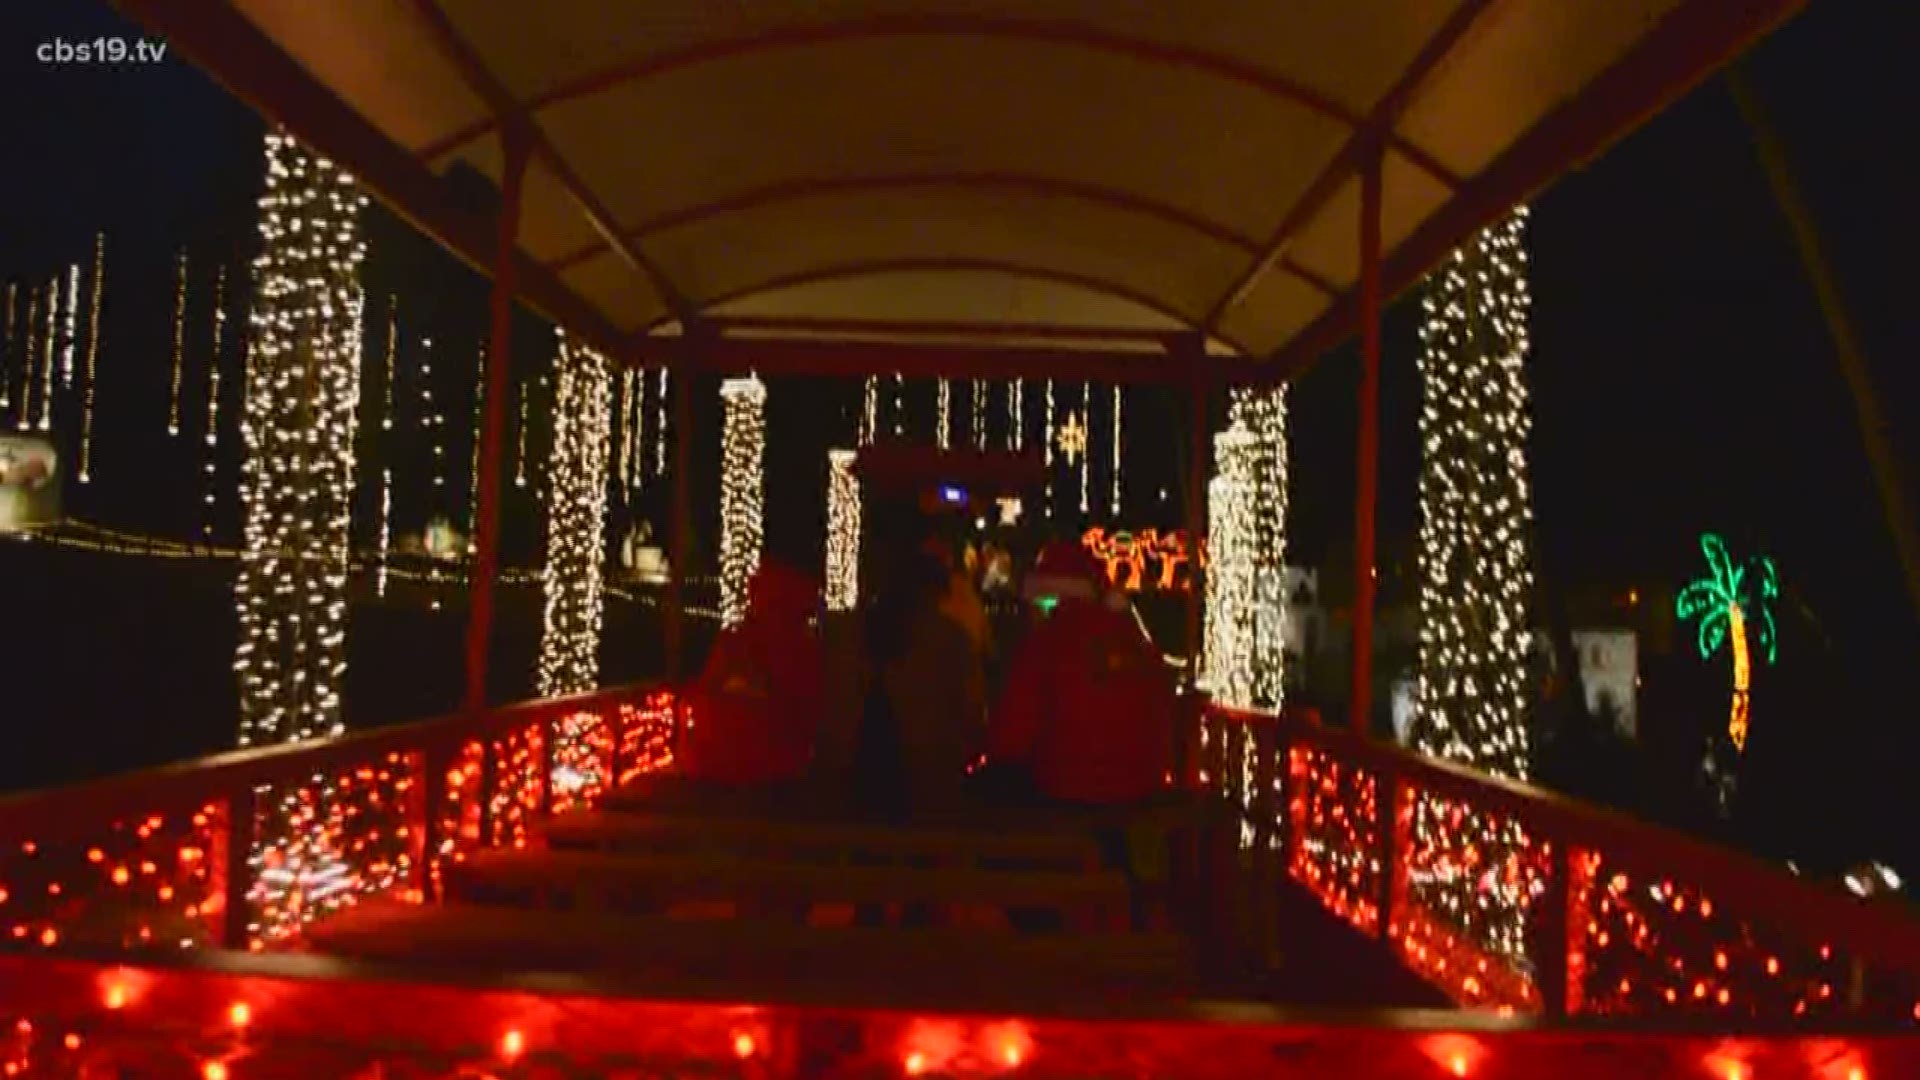 You may have seen their spectacular displays while driving along I-20 at night. Santa Land is a dazzling drive-thru holiday light show, that's helping East Texans get into the Christmas spirit.